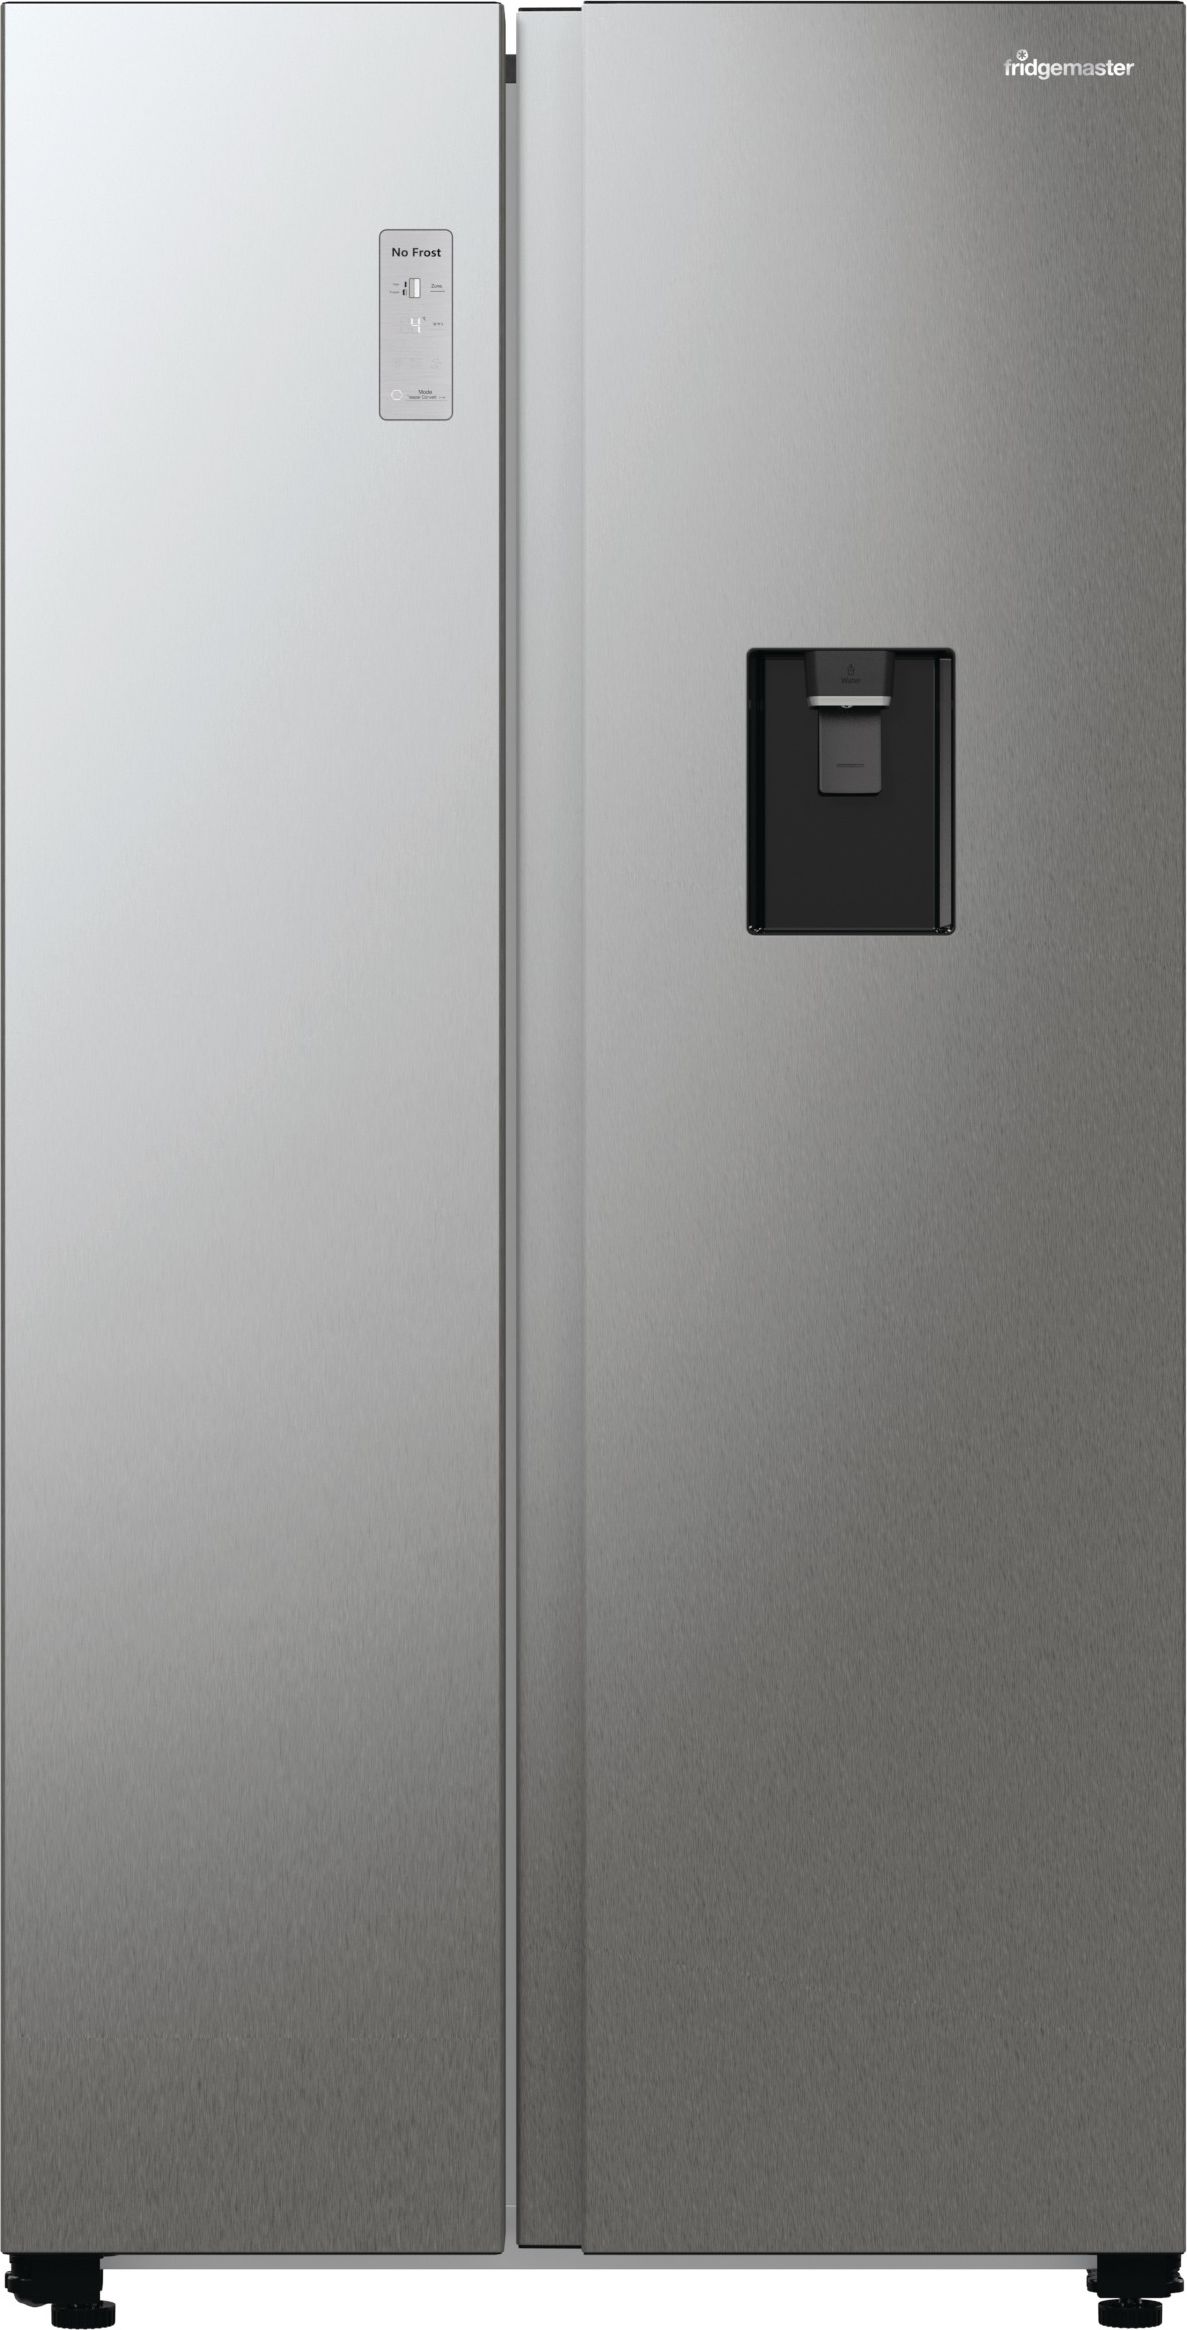 Fridgemaster MS91547DFE Non-Plumbed Total No Frost American Fridge Freezer - Silver - E Rated, Silver